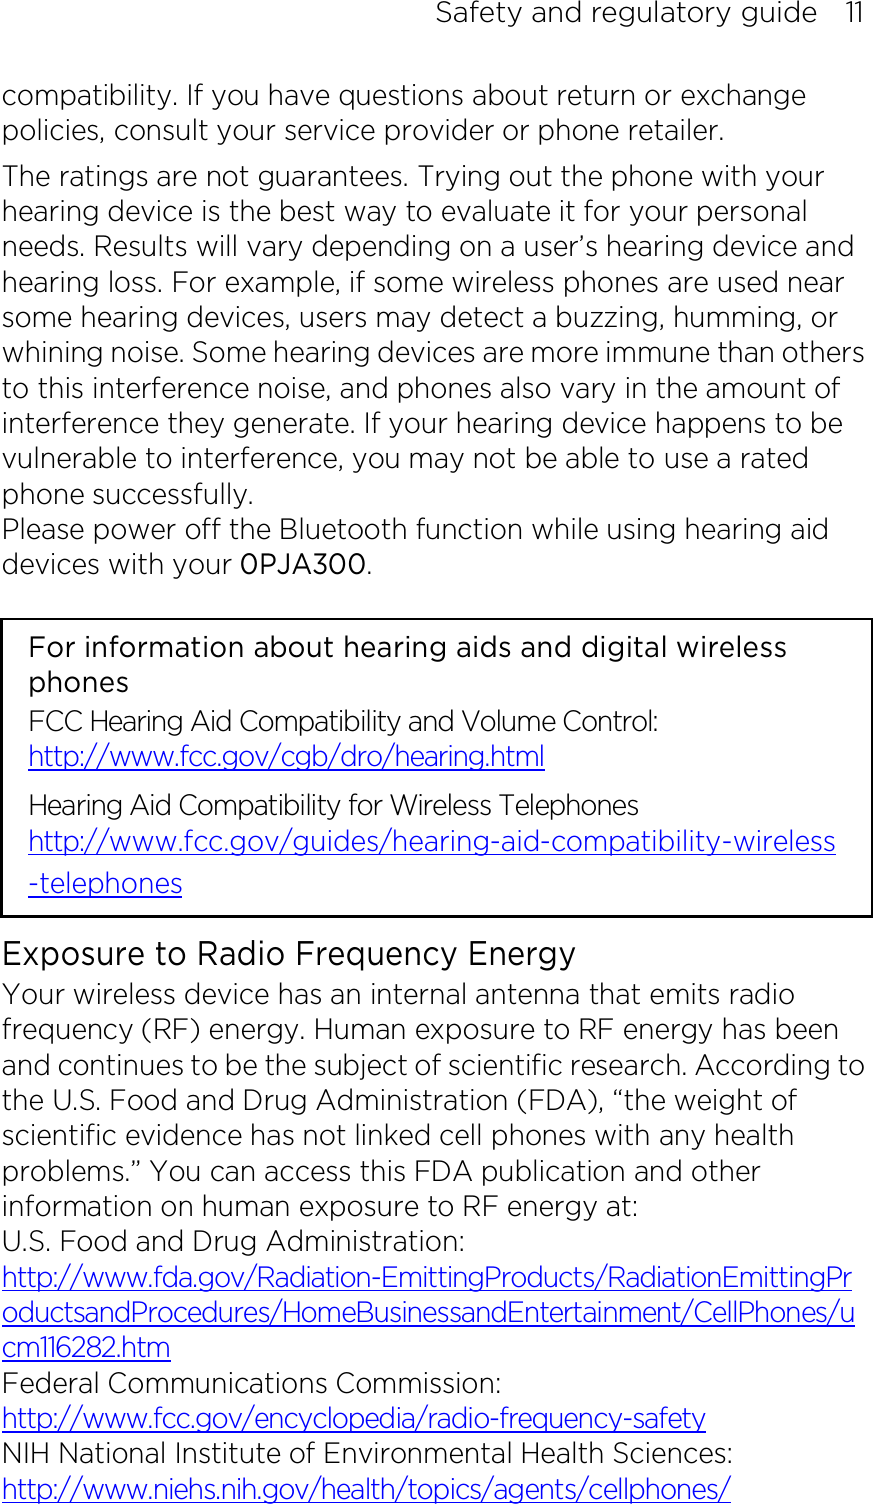 Safety and regulatory guide    11 compatibility. If you have questions about return or exchange policies, consult your service provider or phone retailer. The ratings are not guarantees. Trying out the phone with your hearing device is the best way to evaluate it for your personal needs. Results will vary depending on a user’s hearing device and hearing loss. For example, if some wireless phones are used near some hearing devices, users may detect a buzzing, humming, or whining noise. Some hearing devices are more immune than others to this interference noise, and phones also vary in the amount of interference they generate. If your hearing device happens to be vulnerable to interference, you may not be able to use a rated phone successfully. Please power off the Bluetooth function while using hearing aid devices with your 0PJA300.                                                                      For information about hearing aids and digital wireless phones FCC Hearing Aid Compatibility and Volume Control: http://www.fcc.gov/cgb/dro/hearing.html Hearing Aid Compatibility for Wireless Telephones http://www.fcc.gov/guides/hearing-aid-compatibility-wireless-telephones Exposure to Radio Frequency Energy Your wireless device has an internal antenna that emits radio frequency (RF) energy. Human exposure to RF energy has been and continues to be the subject of scientific research. According to the U.S. Food and Drug Administration (FDA), “the weight of scientific evidence has not linked cell phones with any health problems.” You can access this FDA publication and other information on human exposure to RF energy at: U.S. Food and Drug Administration:   http://www.fda.gov/Radiation-EmittingProducts/RadiationEmittingProductsandProcedures/HomeBusinessandEntertainment/CellPhones/ucm116282.htm Federal Communications Commission:   http://www.fcc.gov/encyclopedia/radio-frequency-safety NIH National Institute of Environmental Health Sciences:   http://www.niehs.nih.gov/health/topics/agents/cellphones/ 